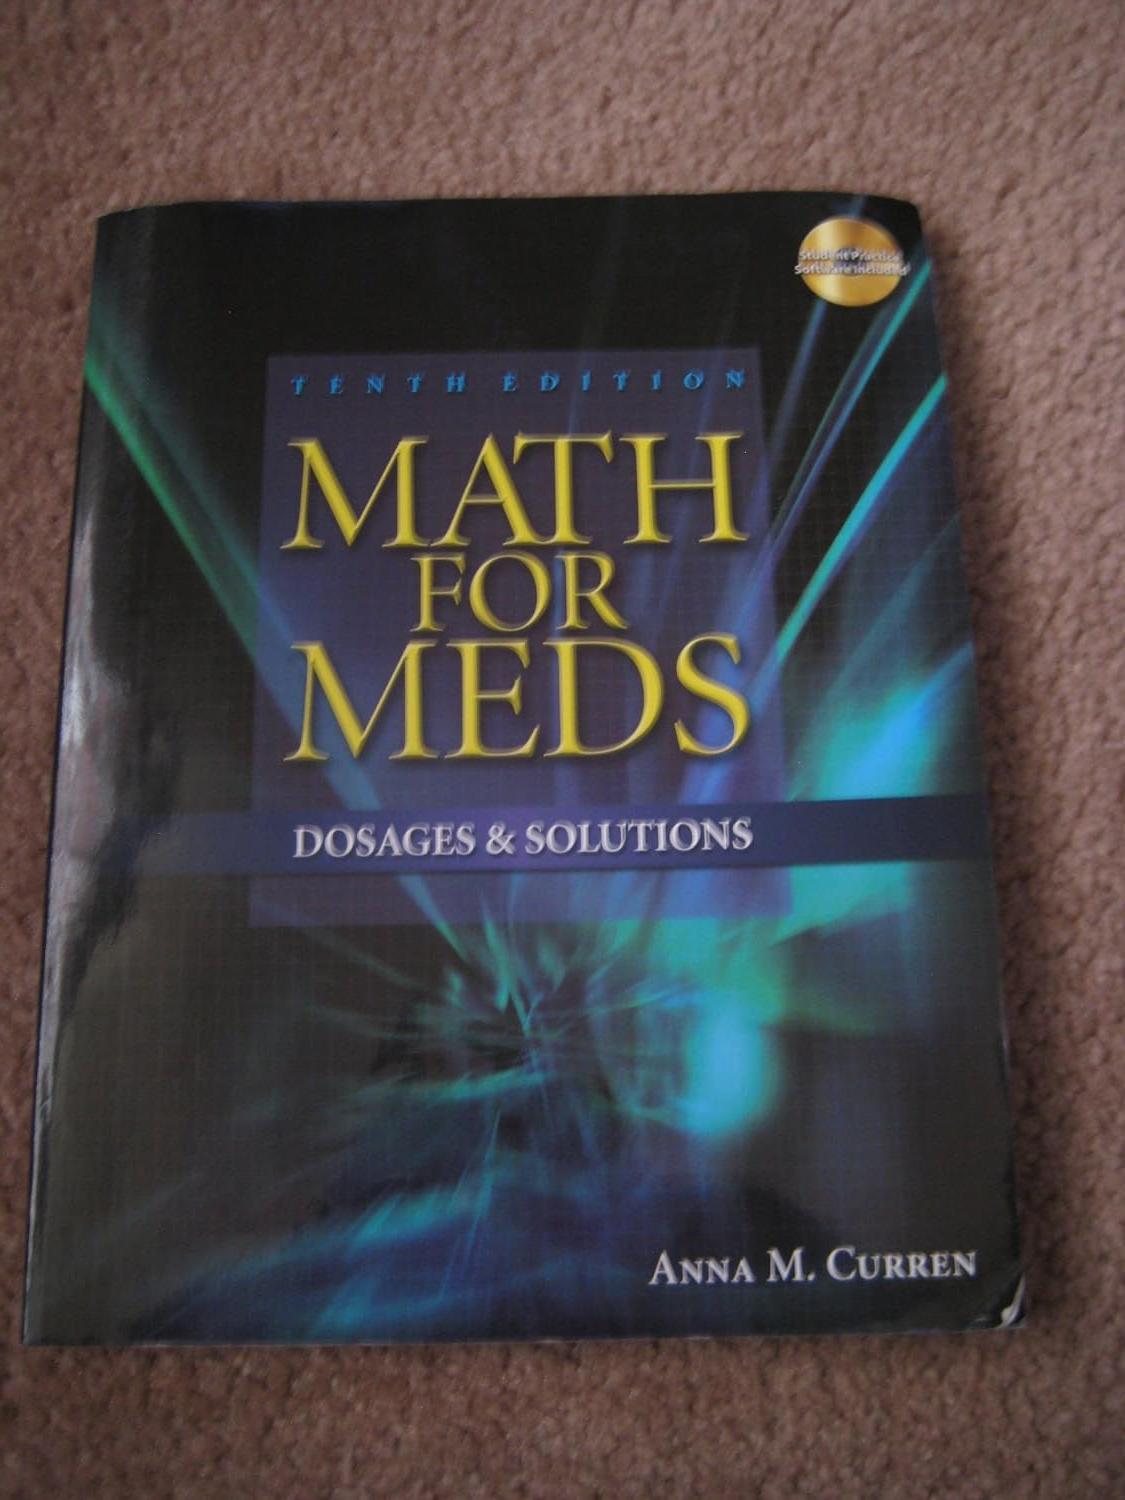 math for meds dosages and solutions 10th edition anna m curren 1428310959, 978-1428310957